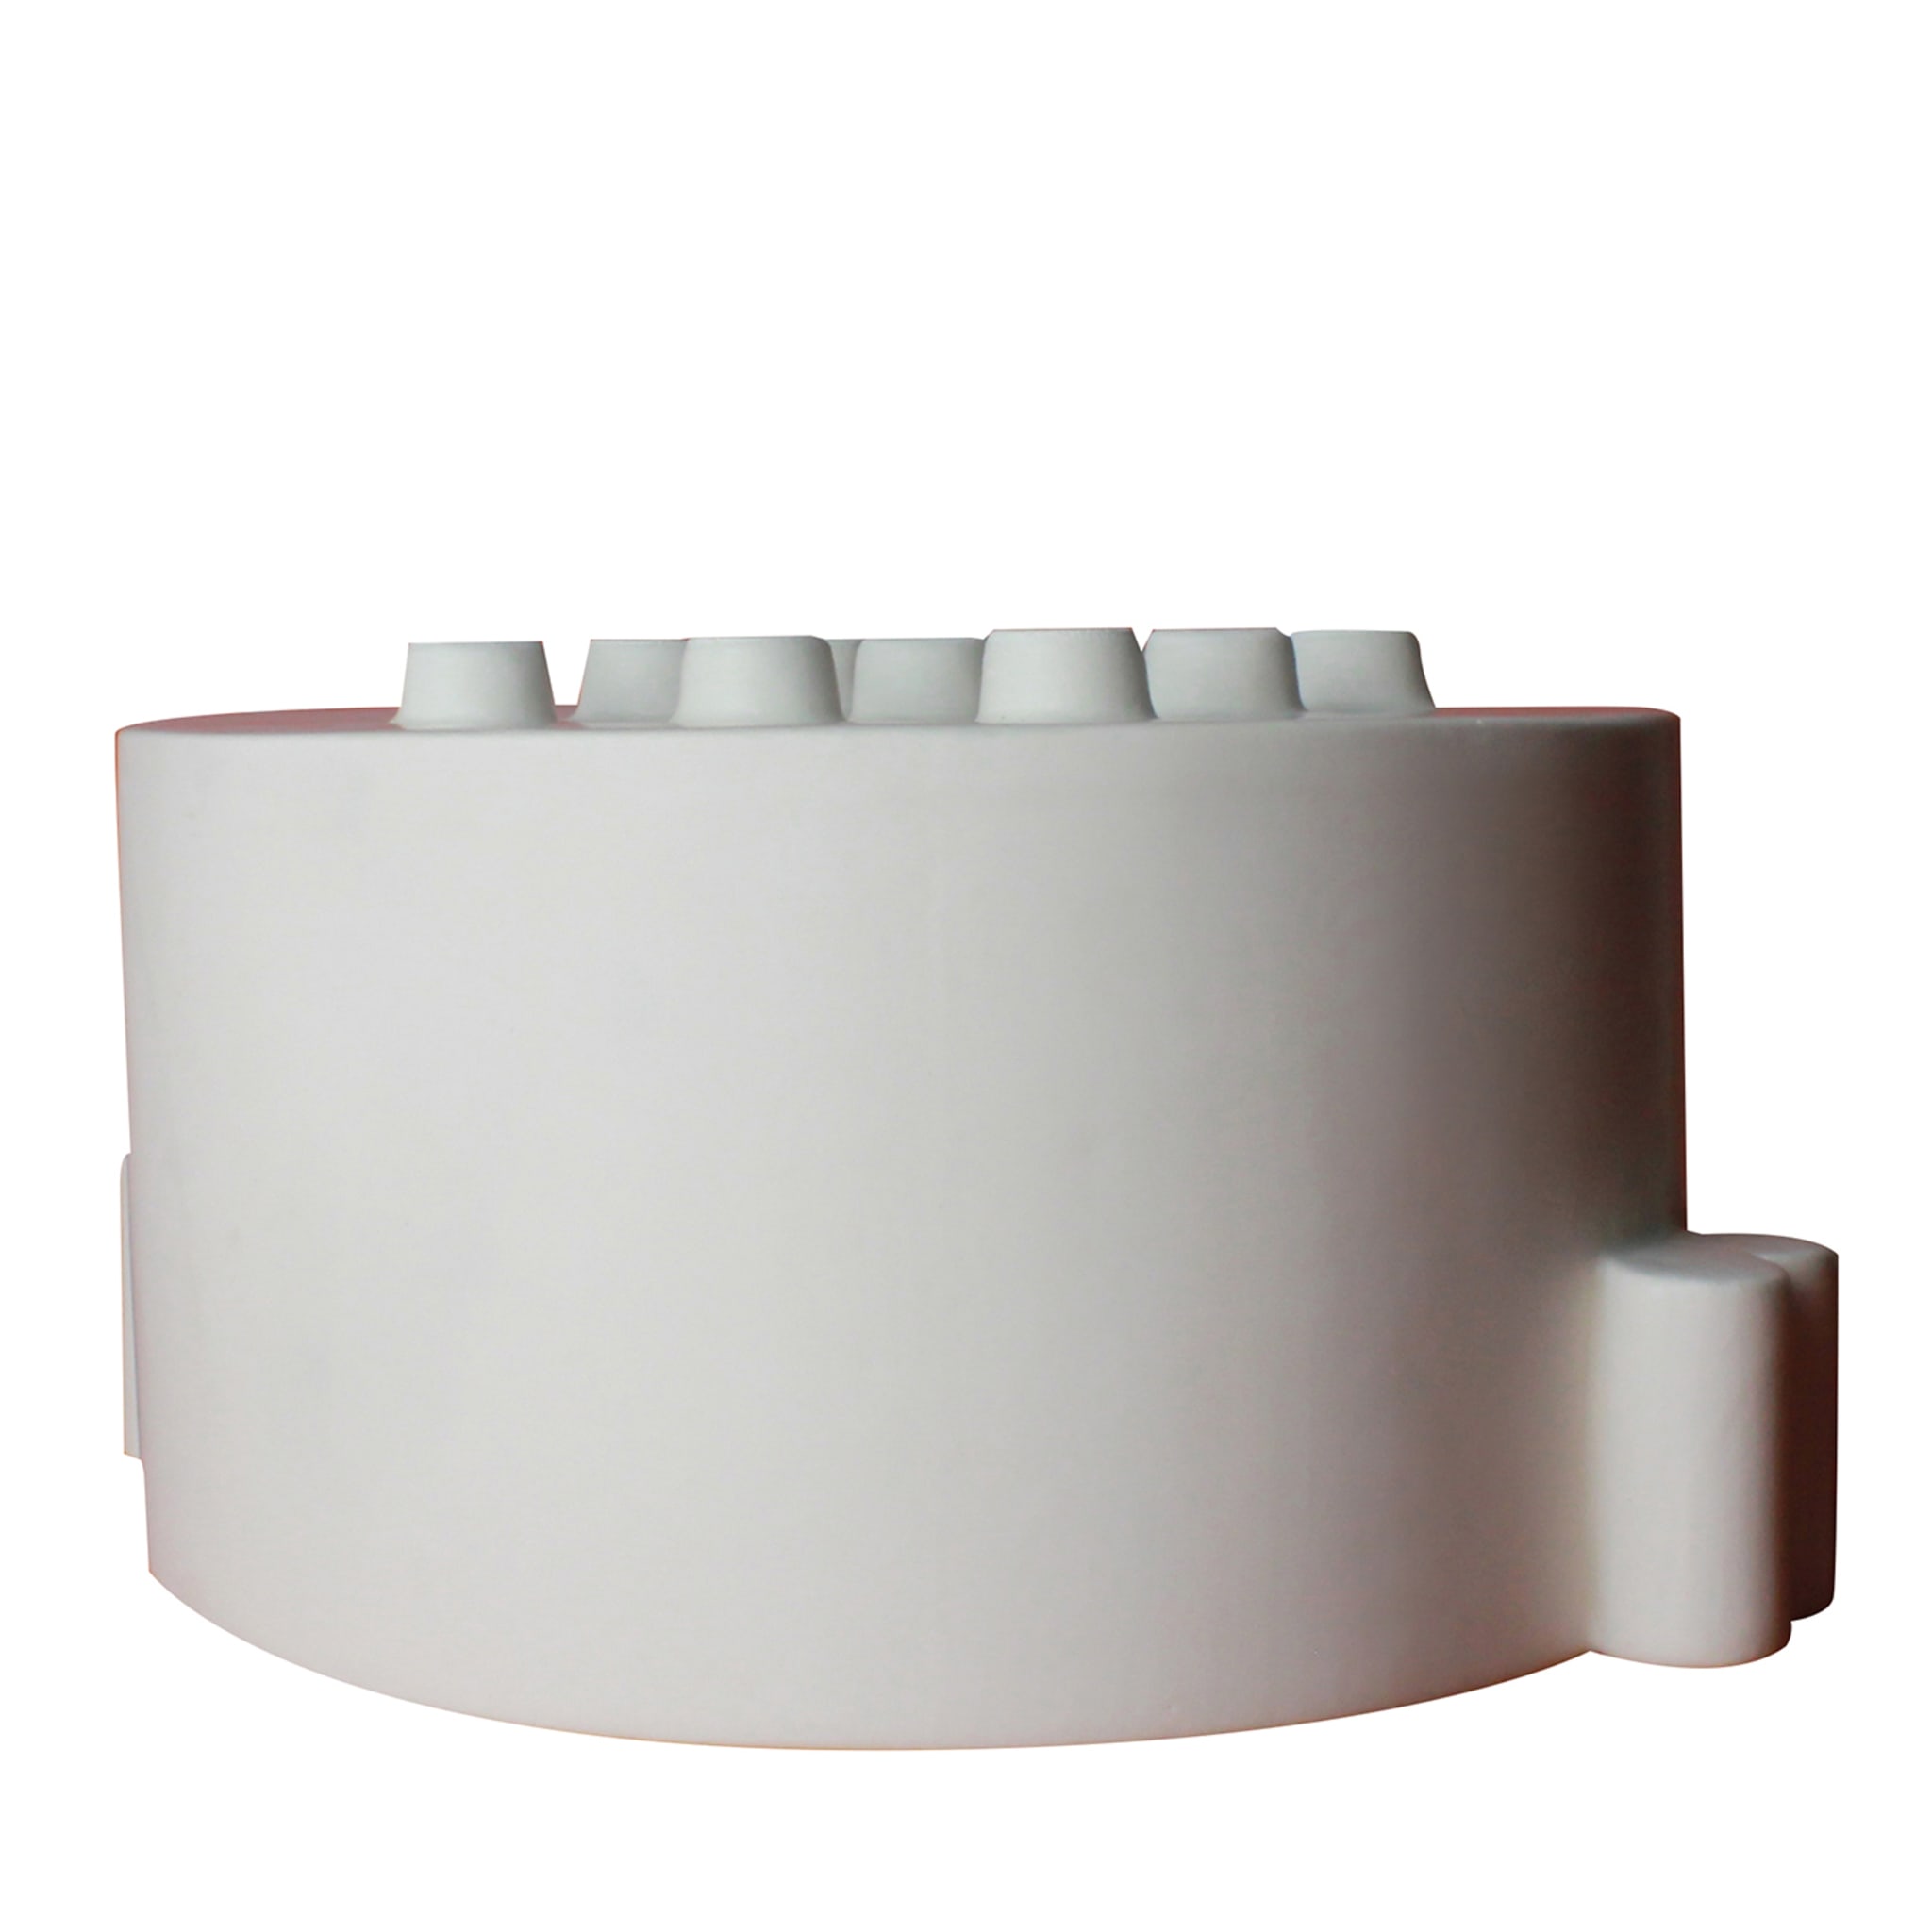 Deep serving dish - Ultrabold Ceramic Collection - Main view